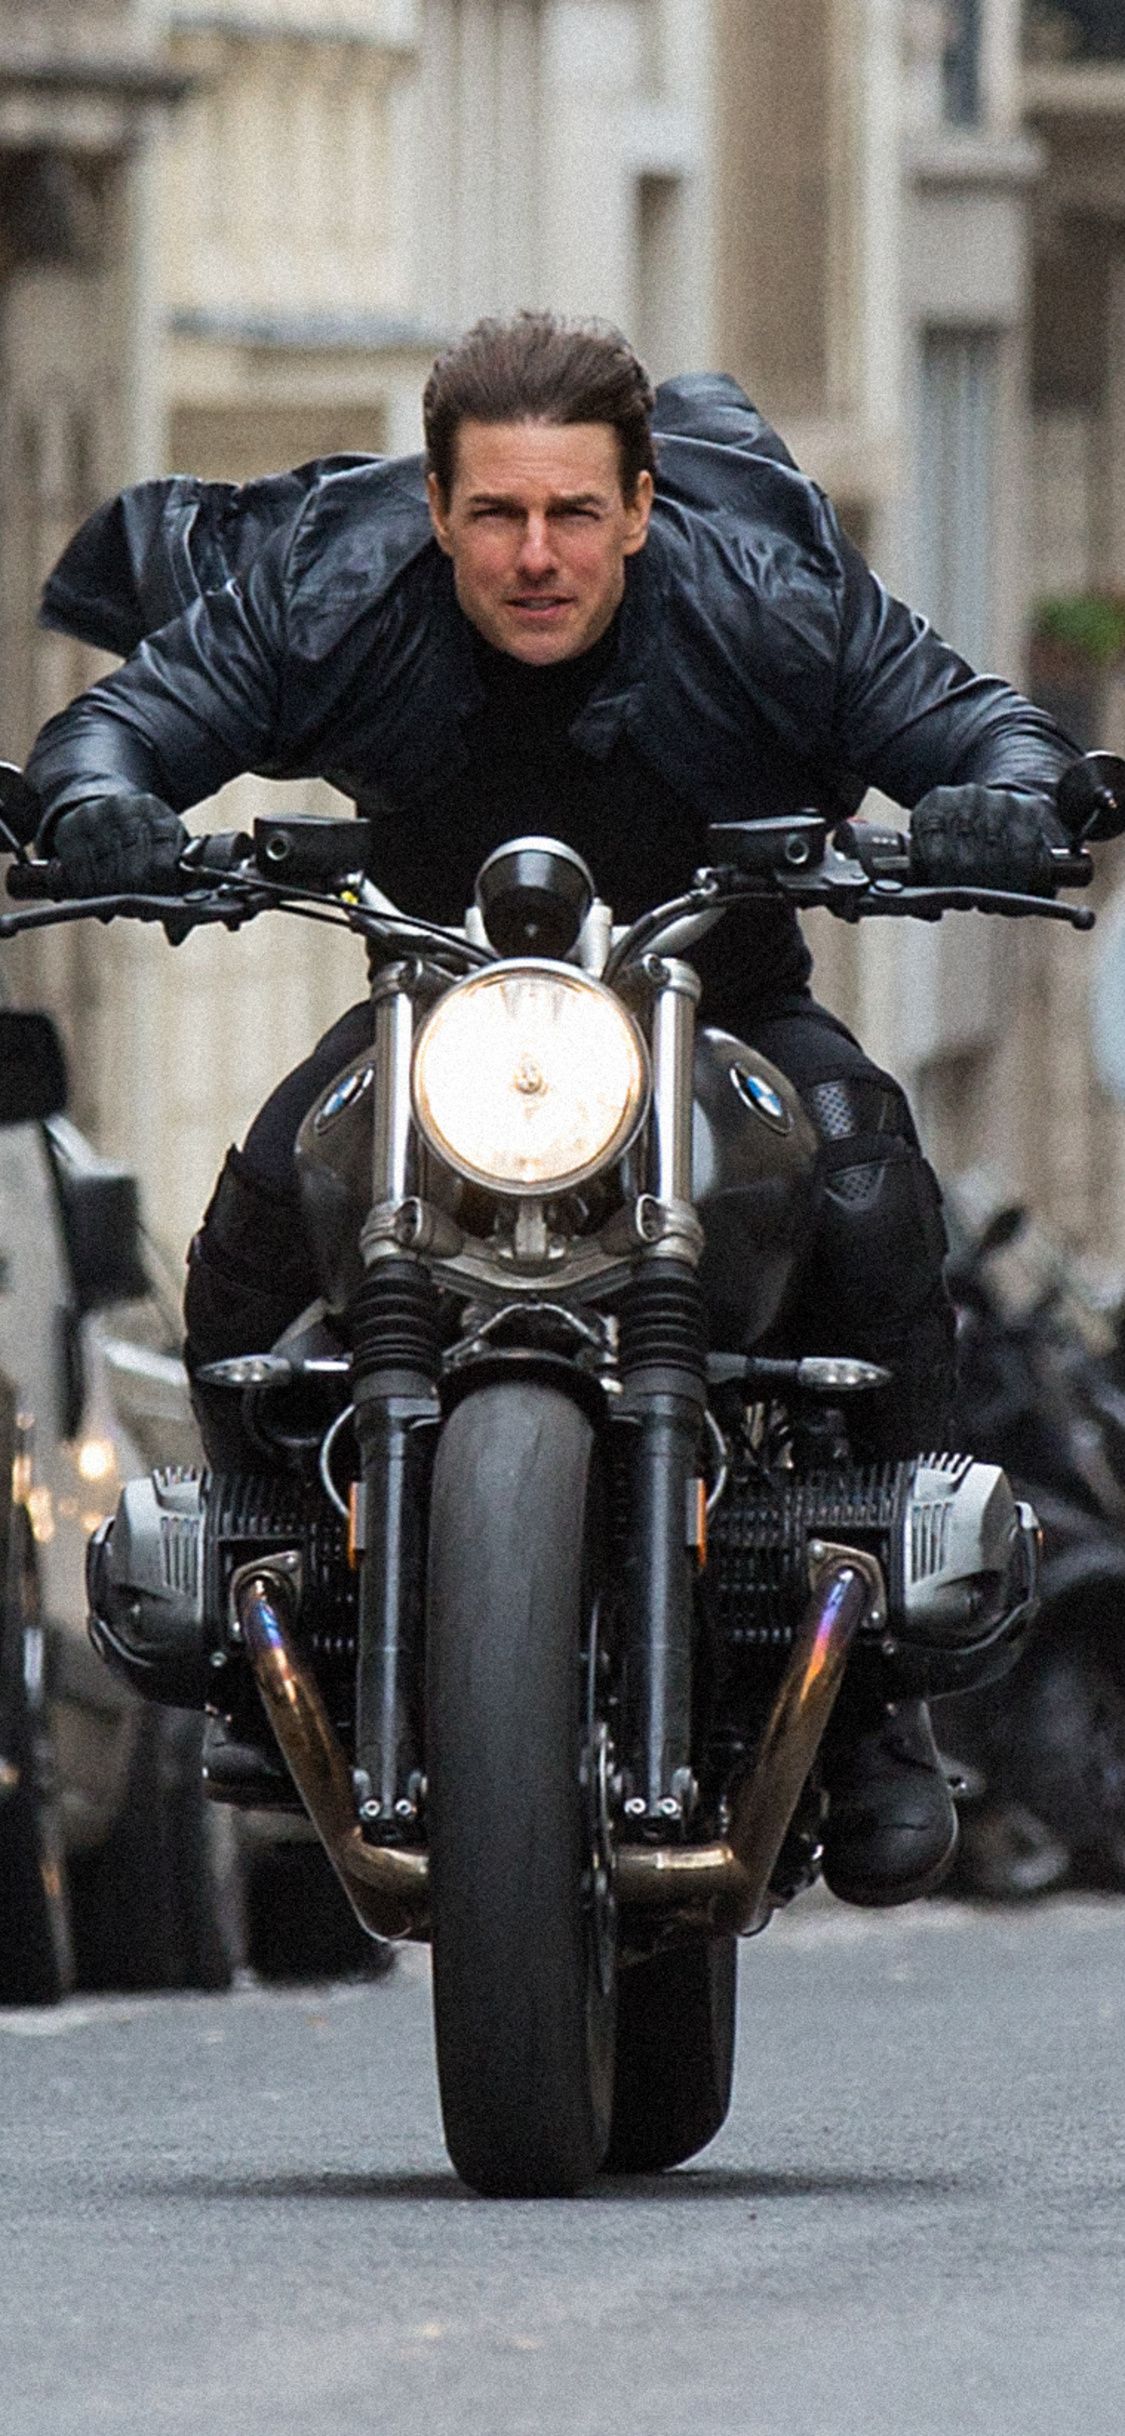 Tom Cruise As Ethan Hunt In Mission Impossible Fallout 2018 iPhone XS, iPhone iPhone X HD 4k Wallpaper, Image, Background, Photo and Picture